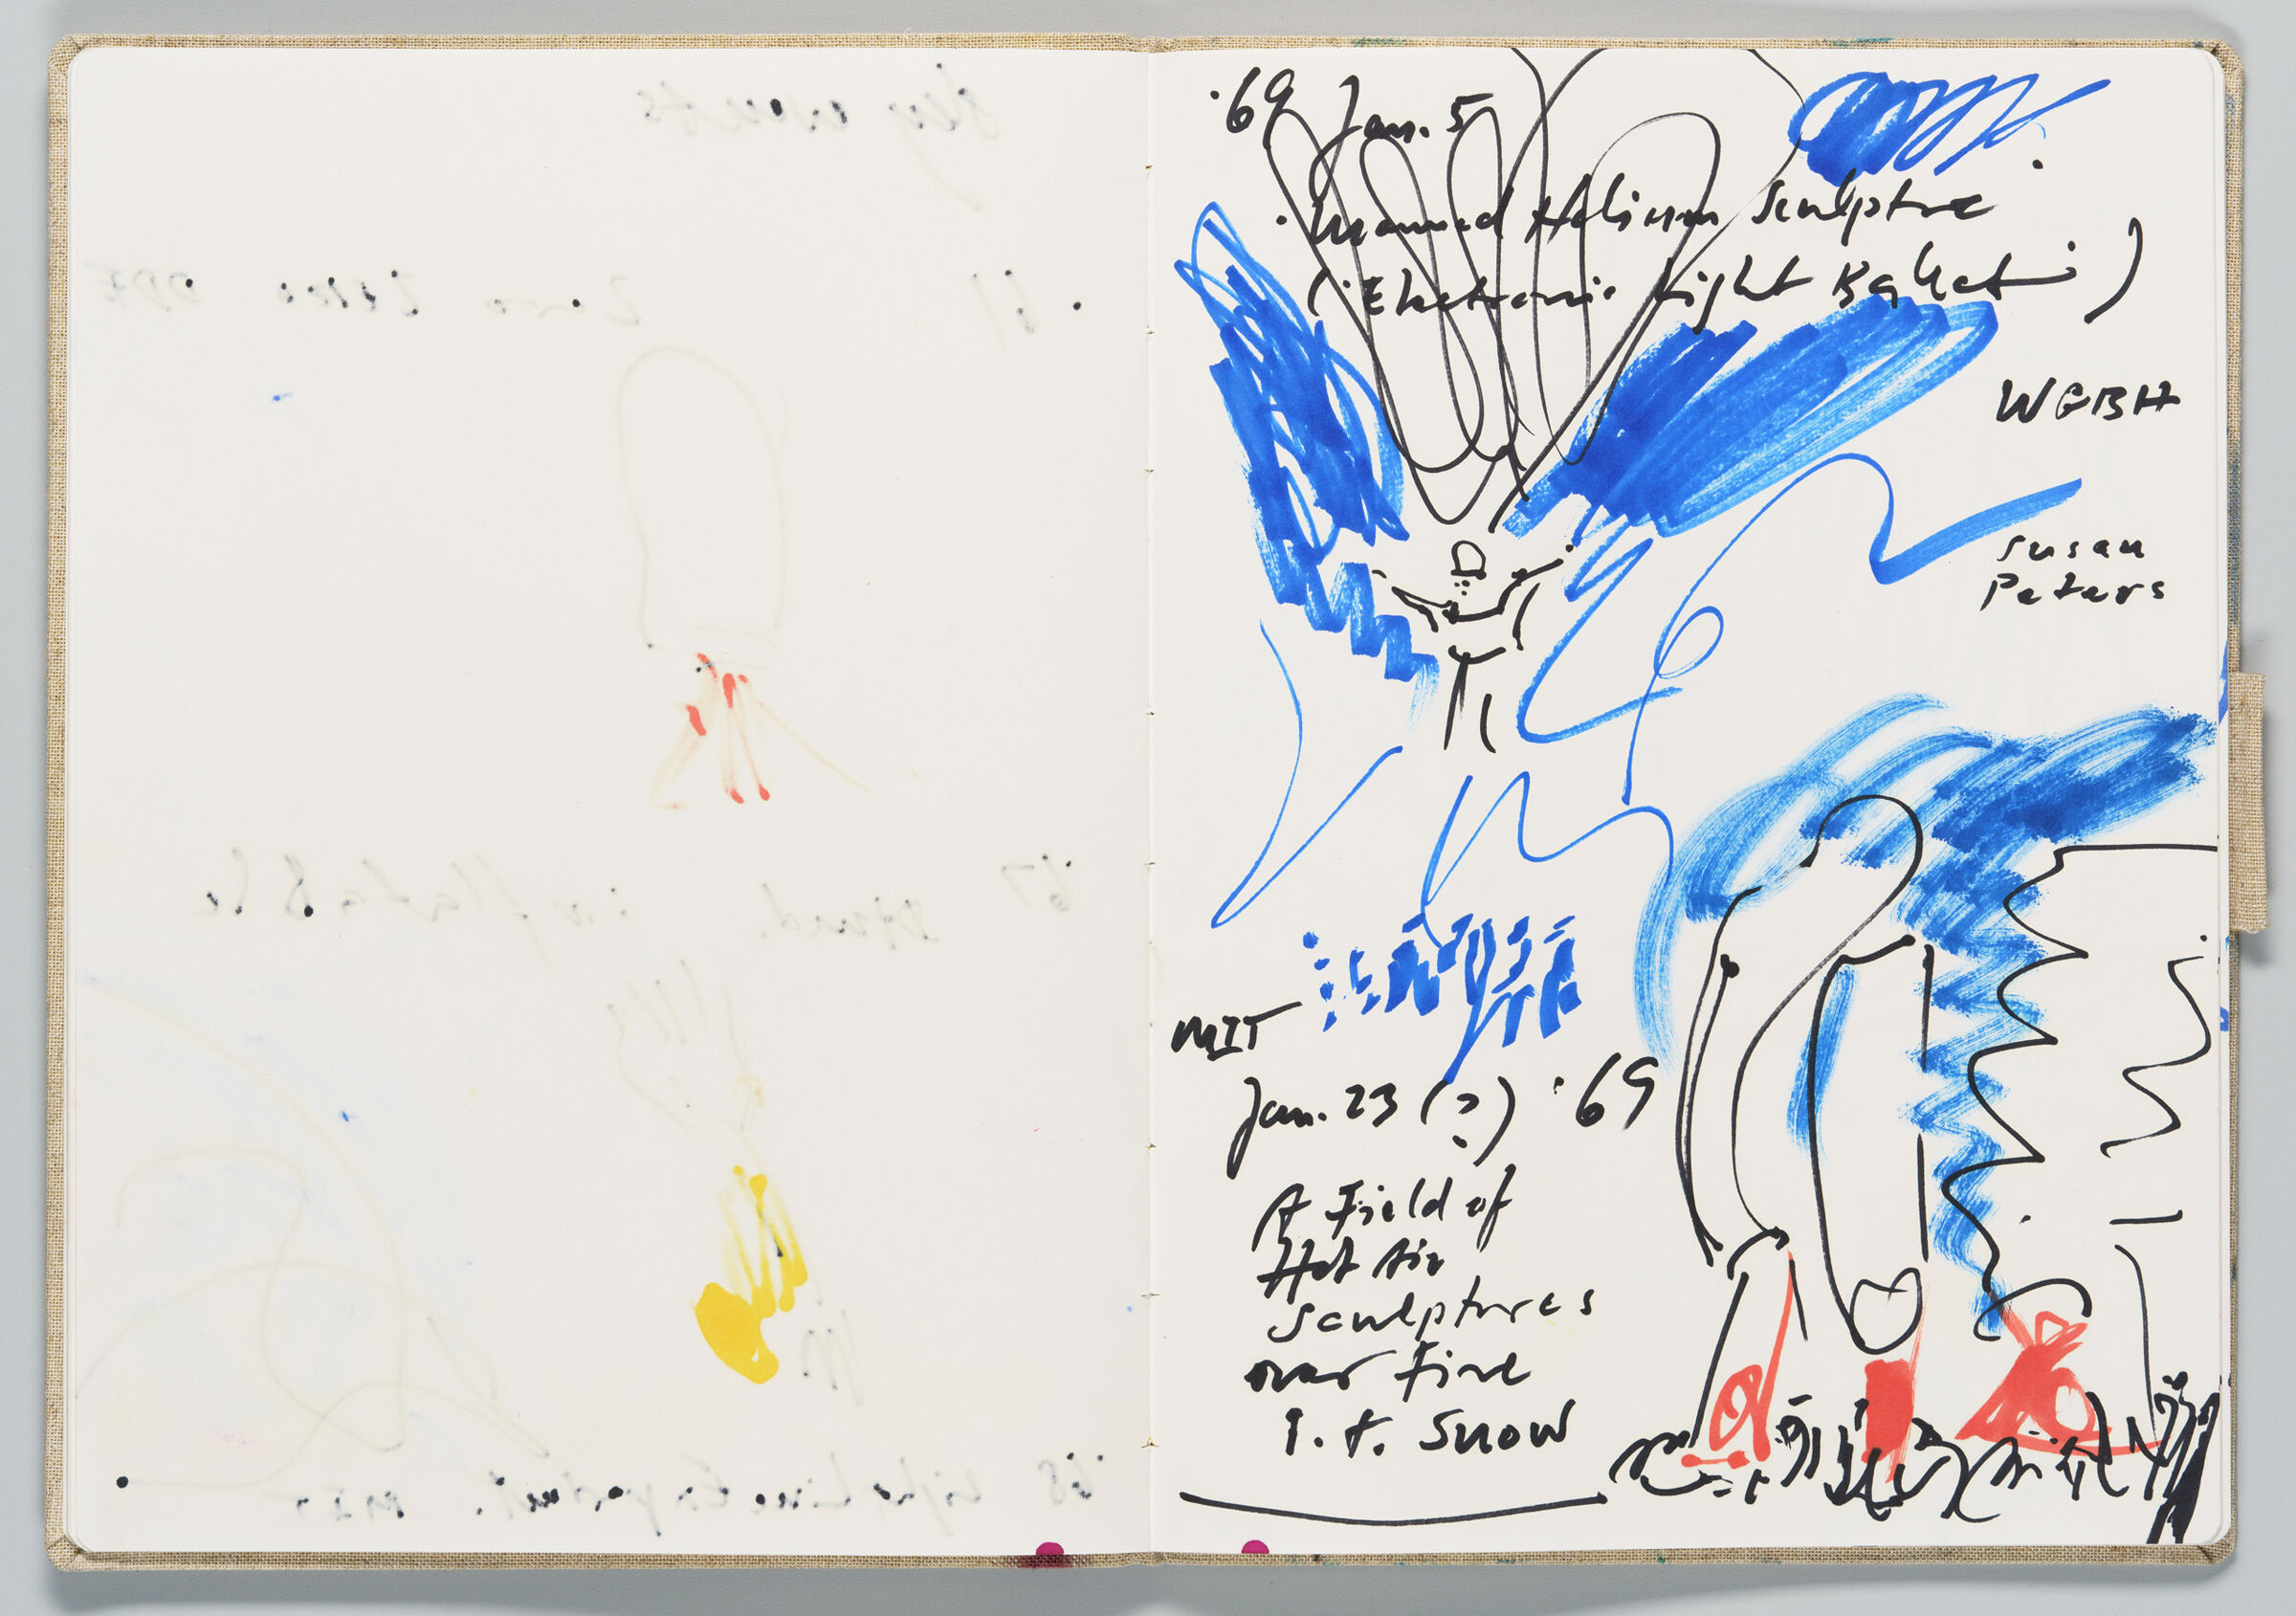 Untitled (Bleed-Through Of Previous Page With Marker Stain, Left Page); Untitled (Sketches Of Past Sky Events, Right Page)